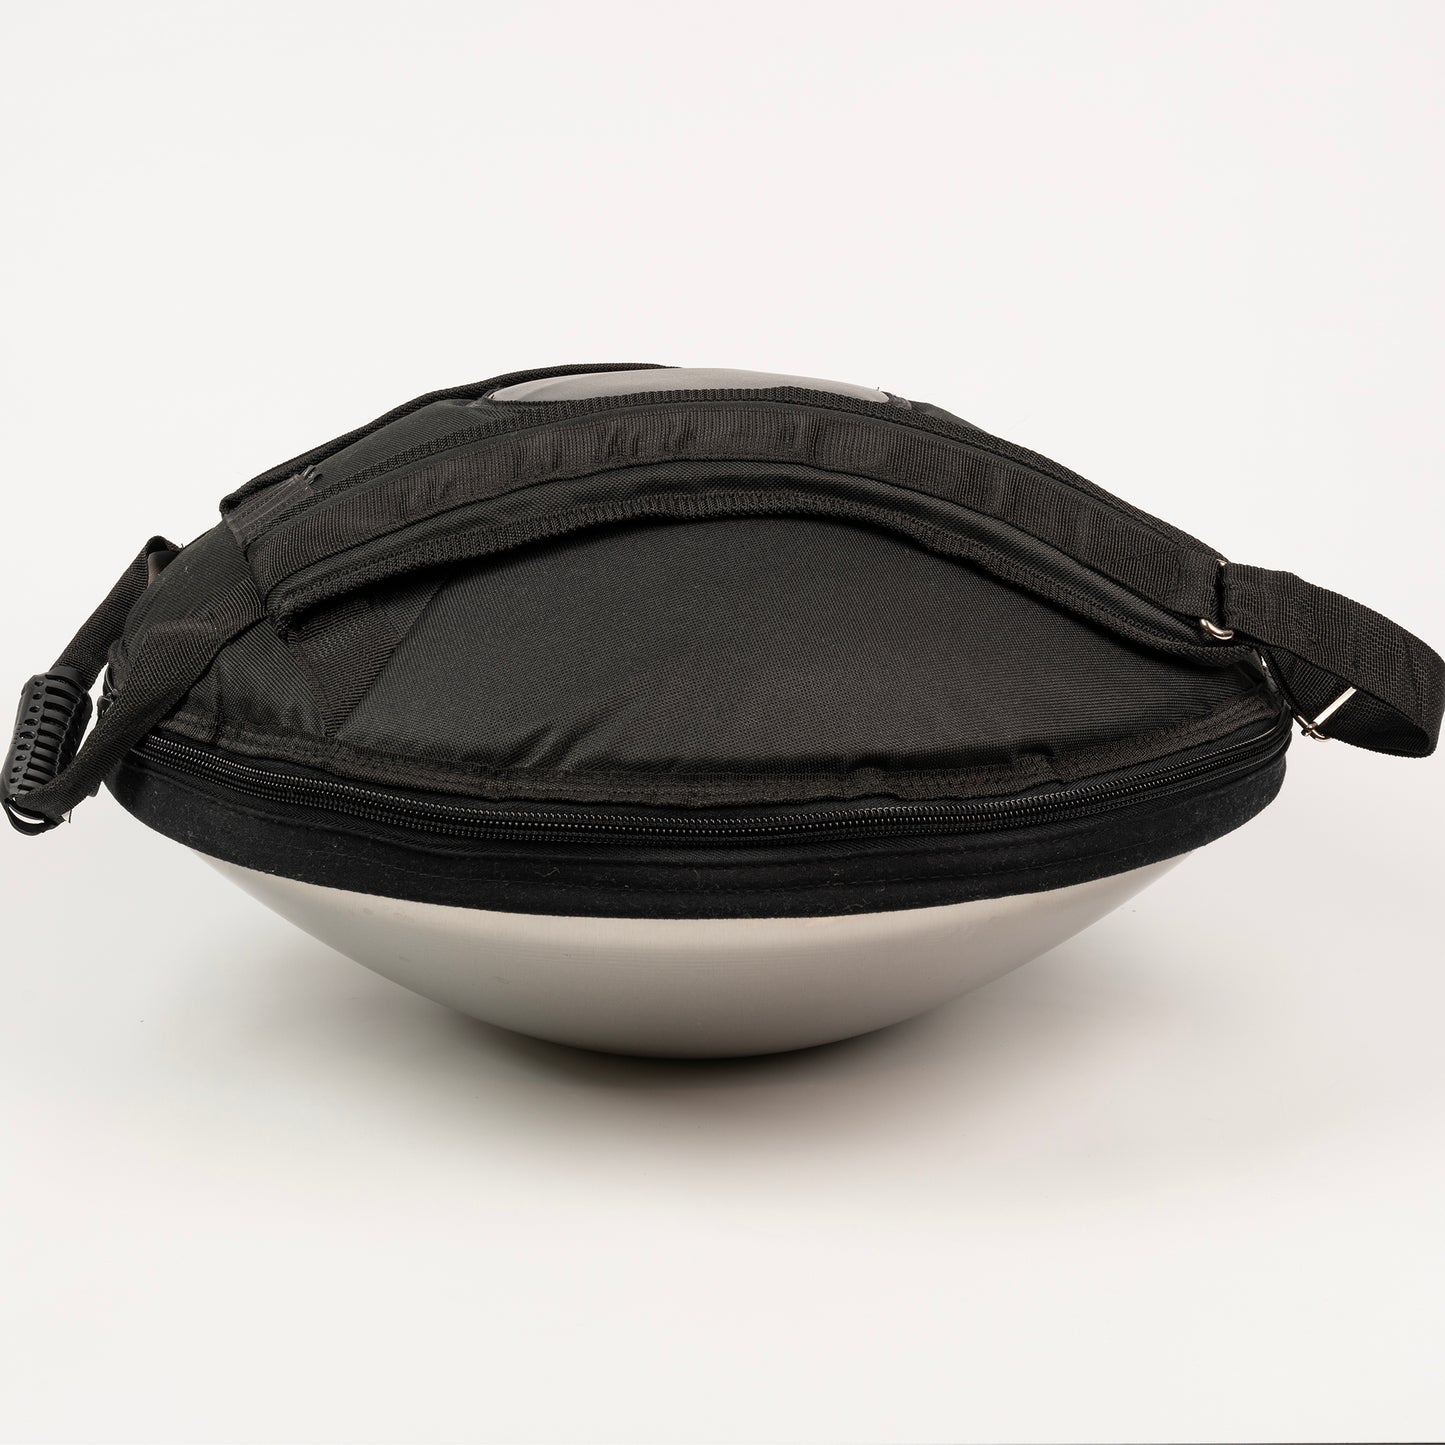 Pi Stainless Steel Hand Pan